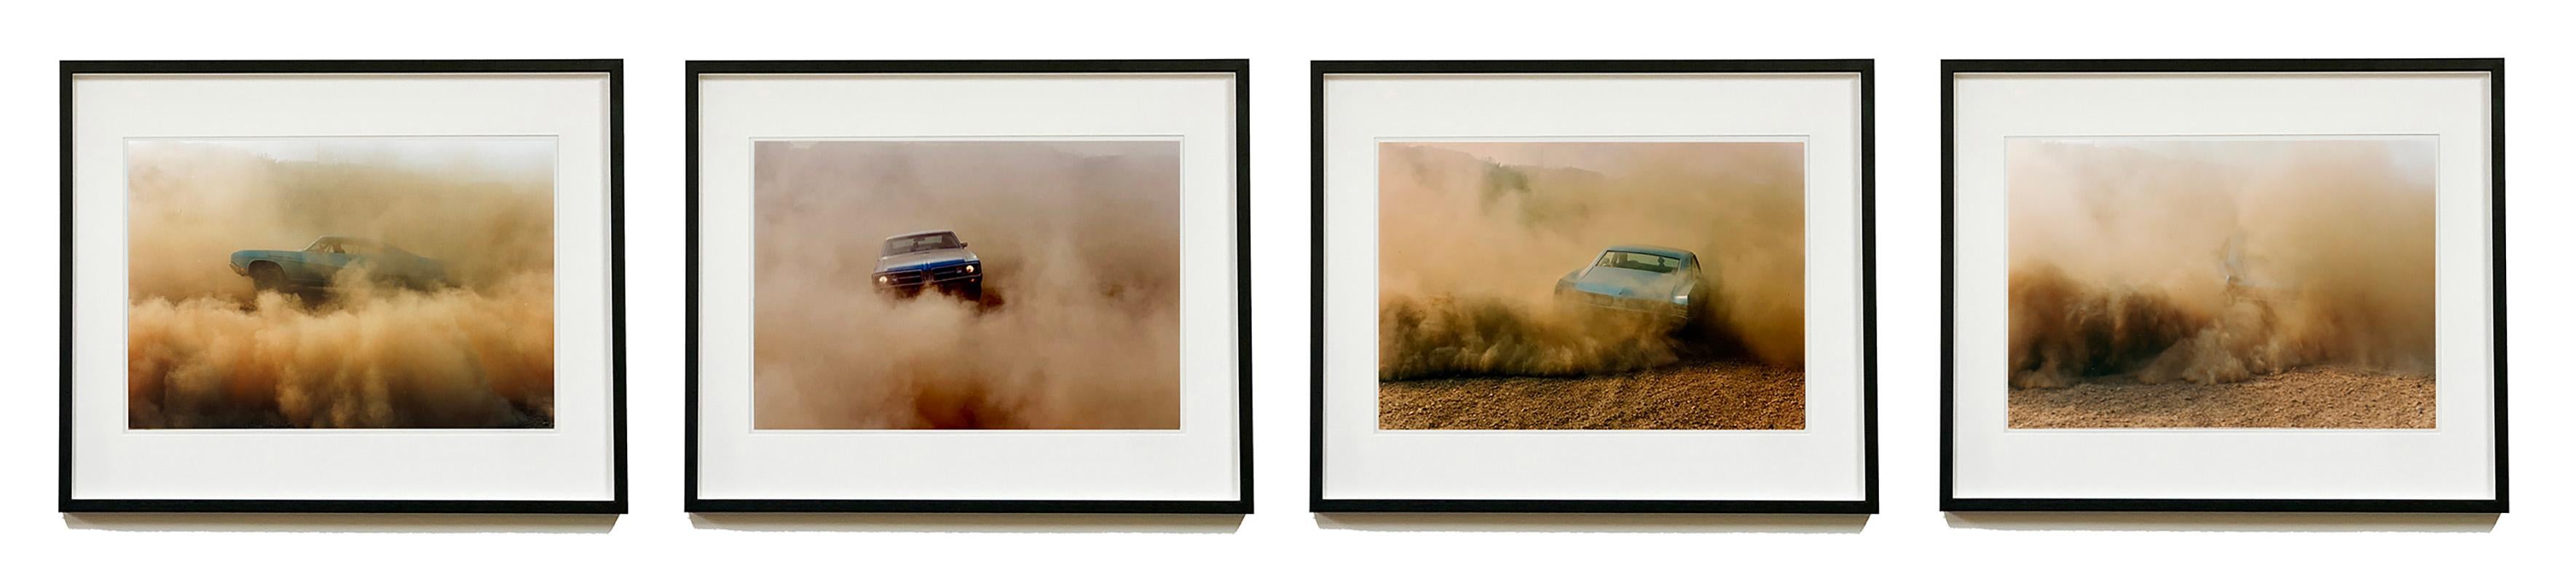 Buick in the Dust, Hemsby, Norfolk - Set of Four Framed Car Photographs For Sale 10